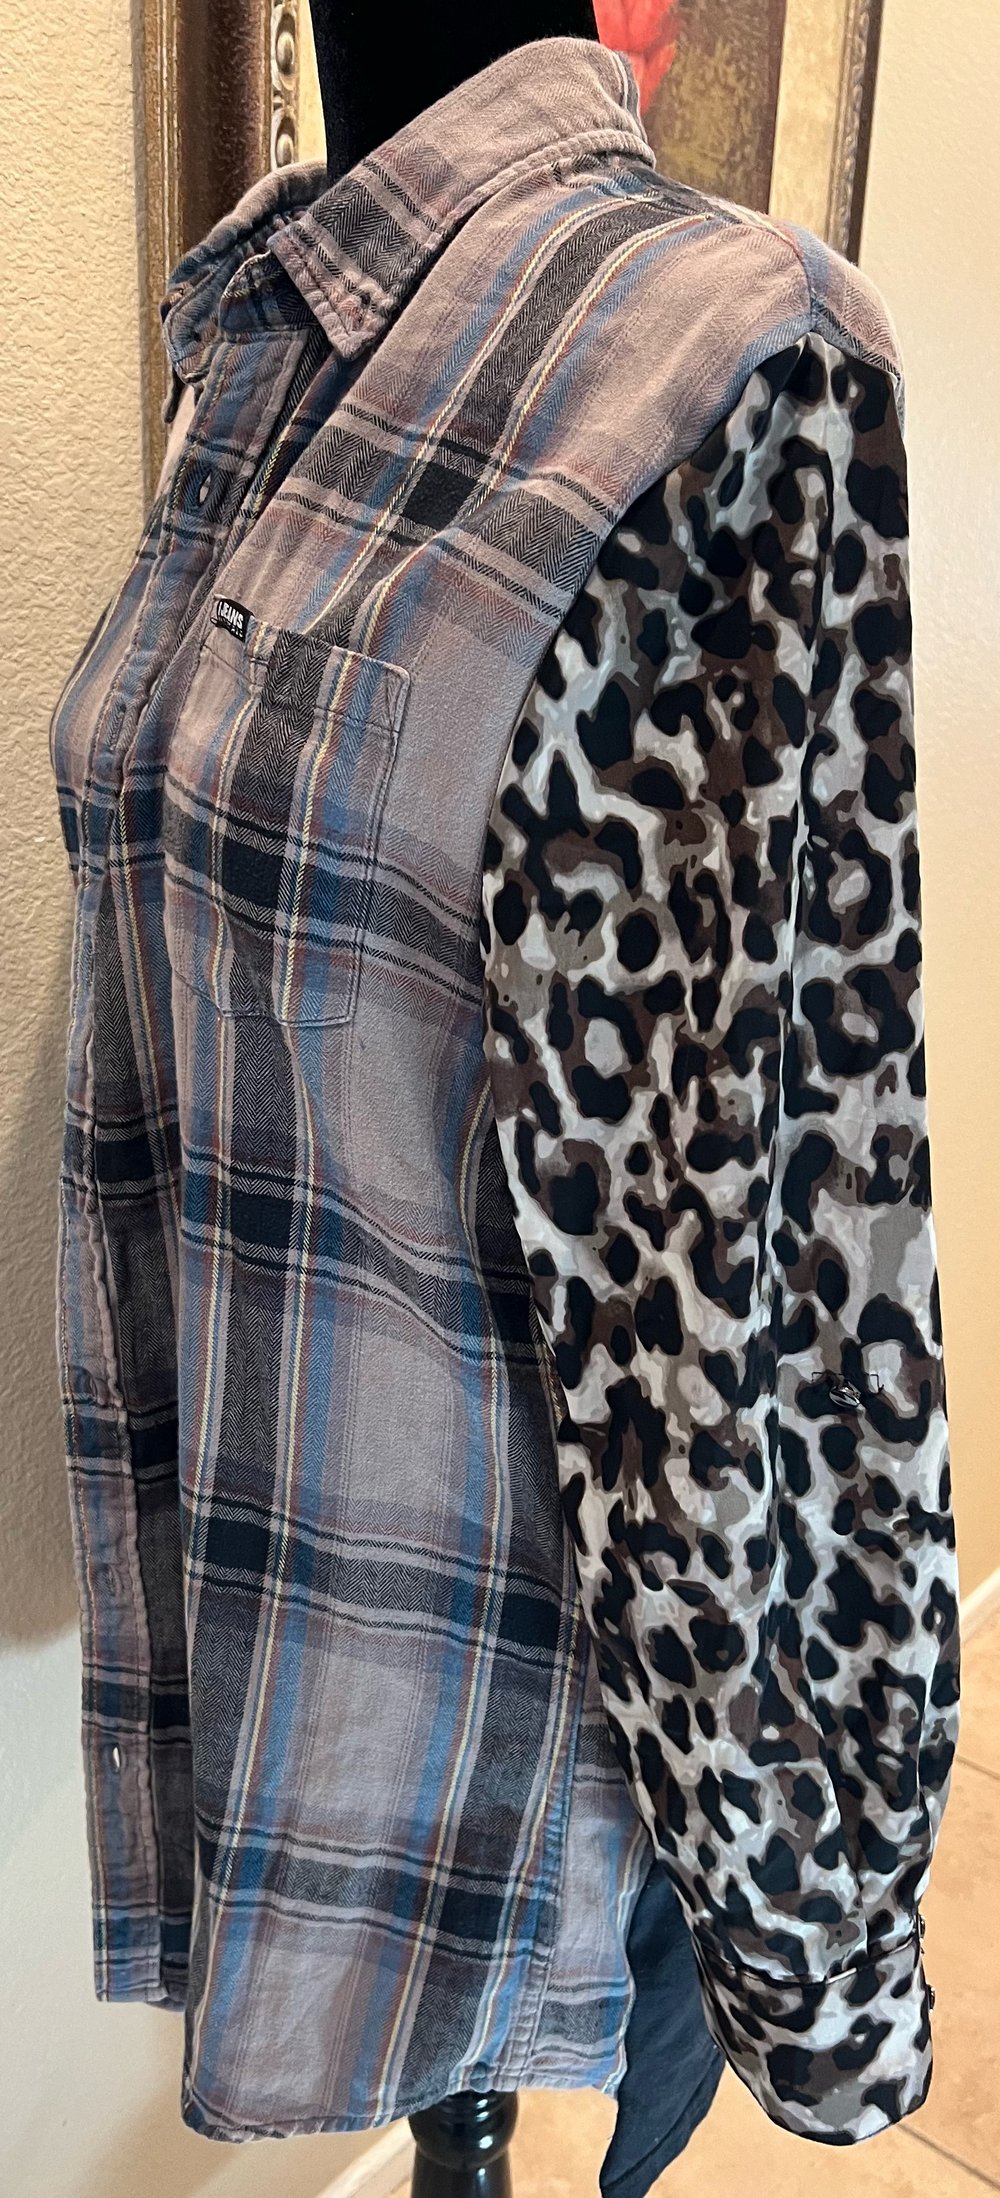 Vintage Blue/Black/Gray Flannel Shirt Leopard Sleeves & X-Ray Fairy